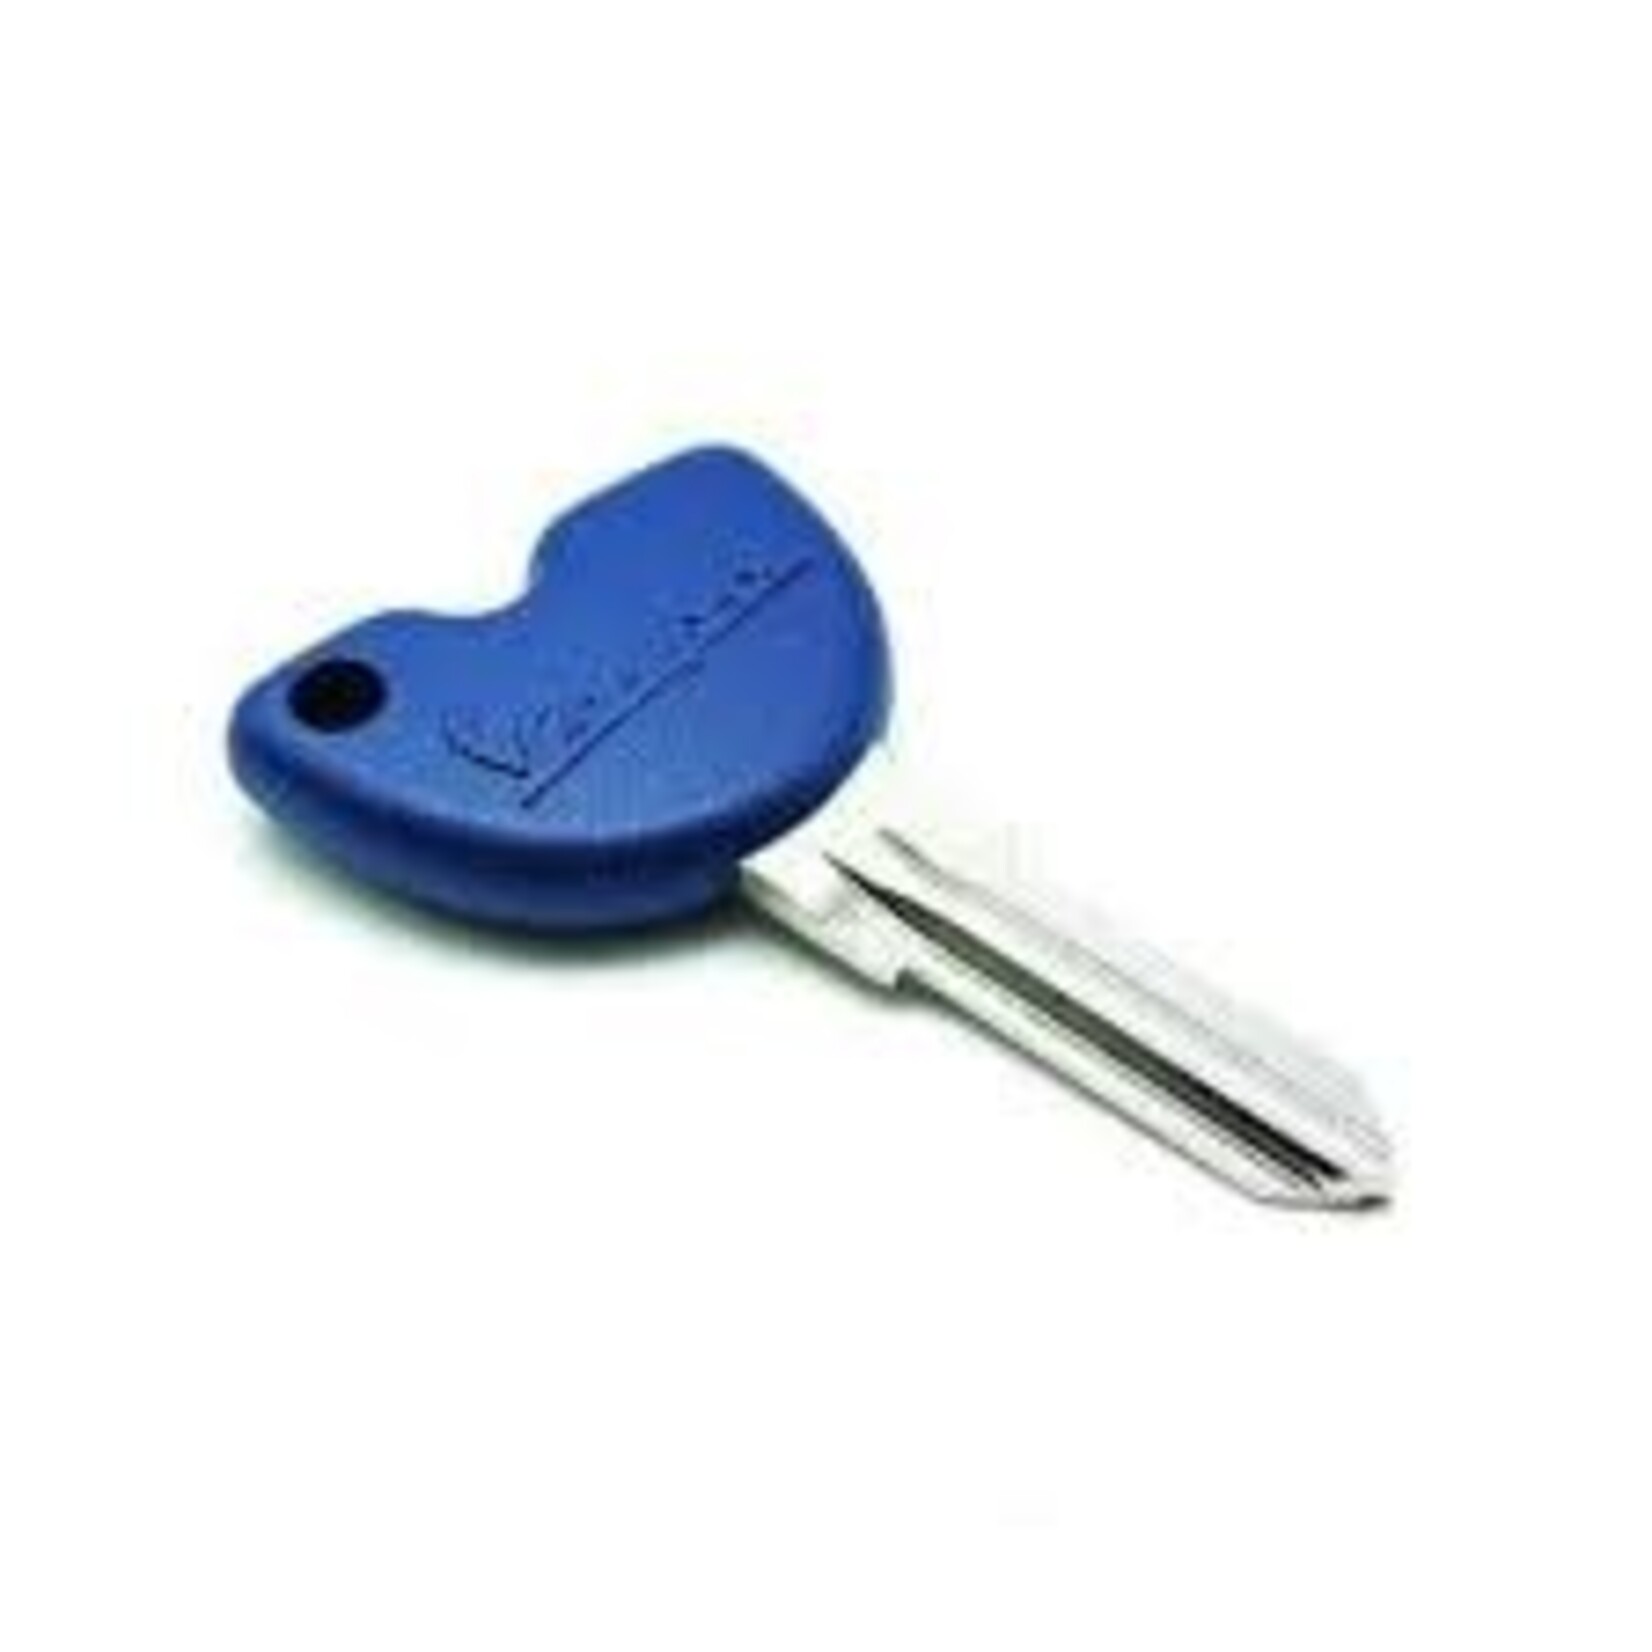 Parts Key Blank, Vespa GTS300HPE/Elettrica 2019+ (With Chip)